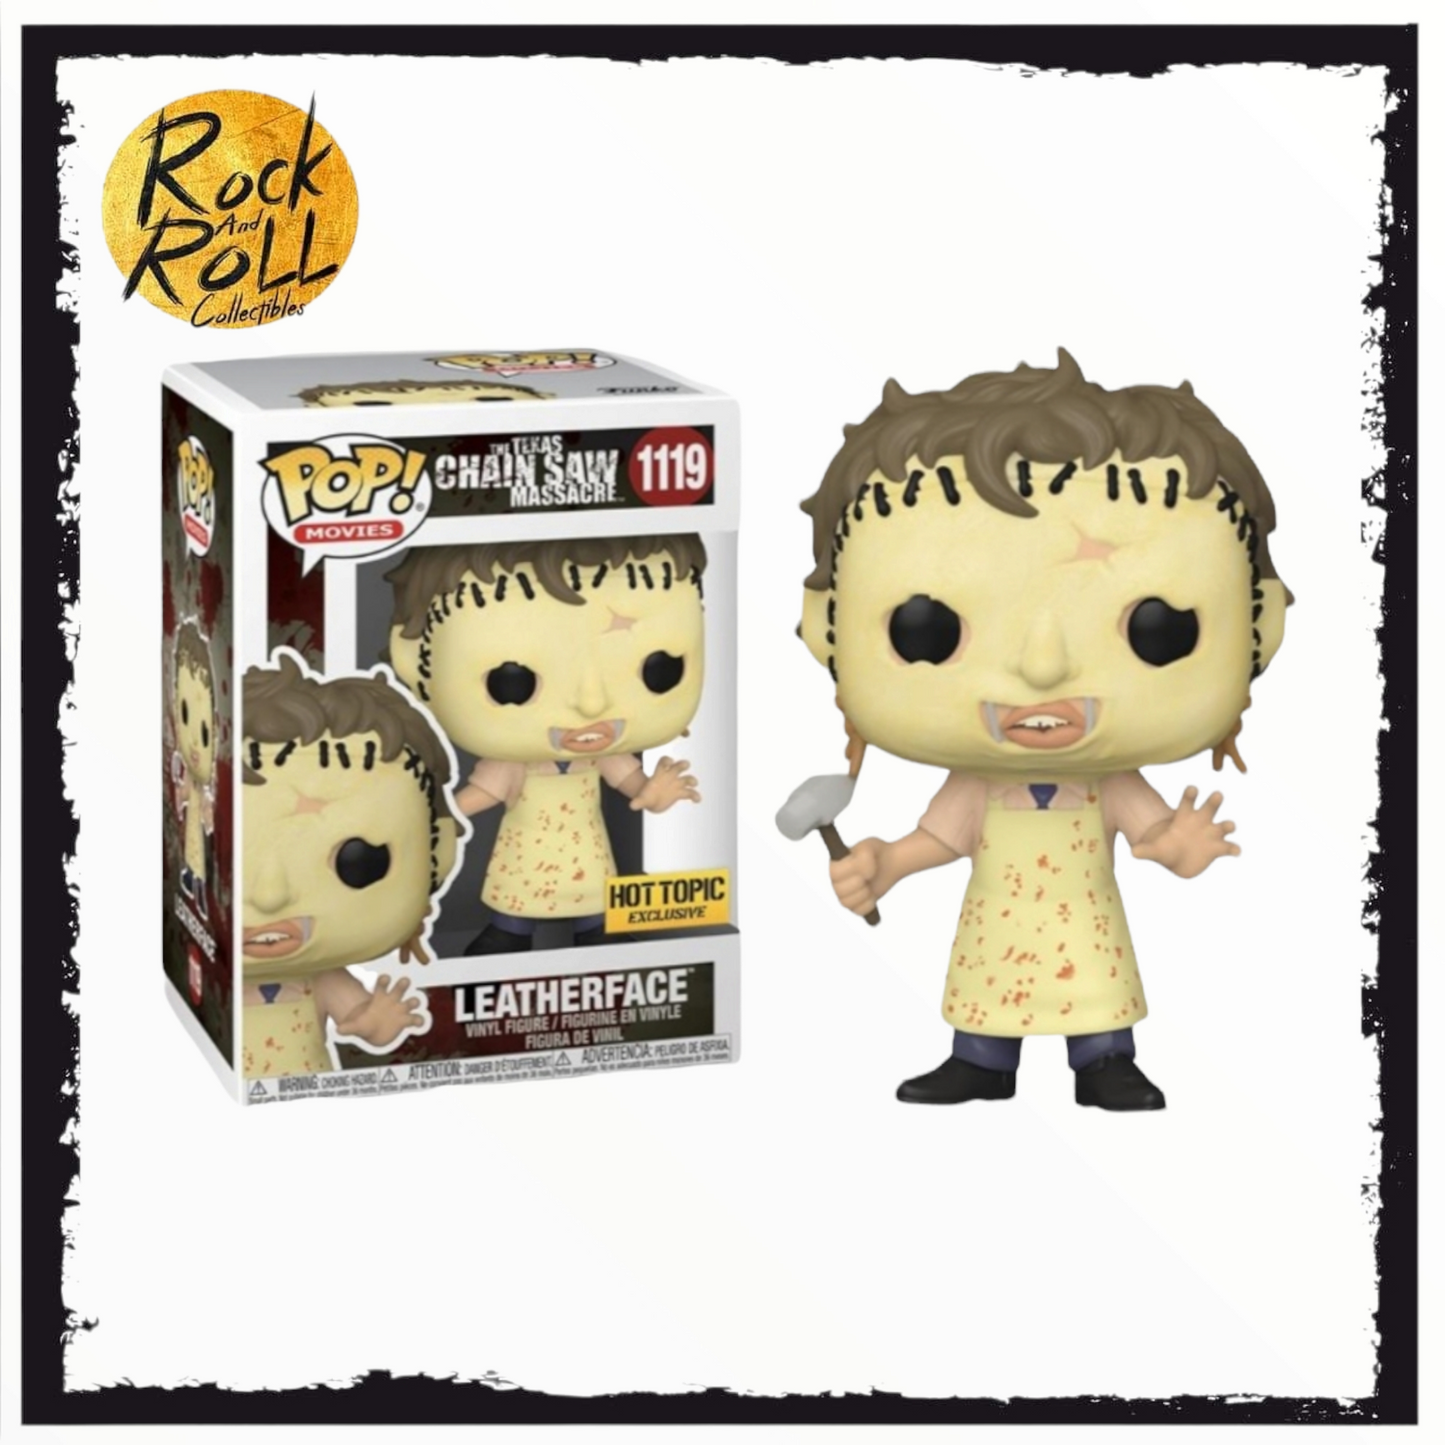 Texas Chainsaw Massacre Funko Pop #1119 Leatherface Hot Topic Exclusive